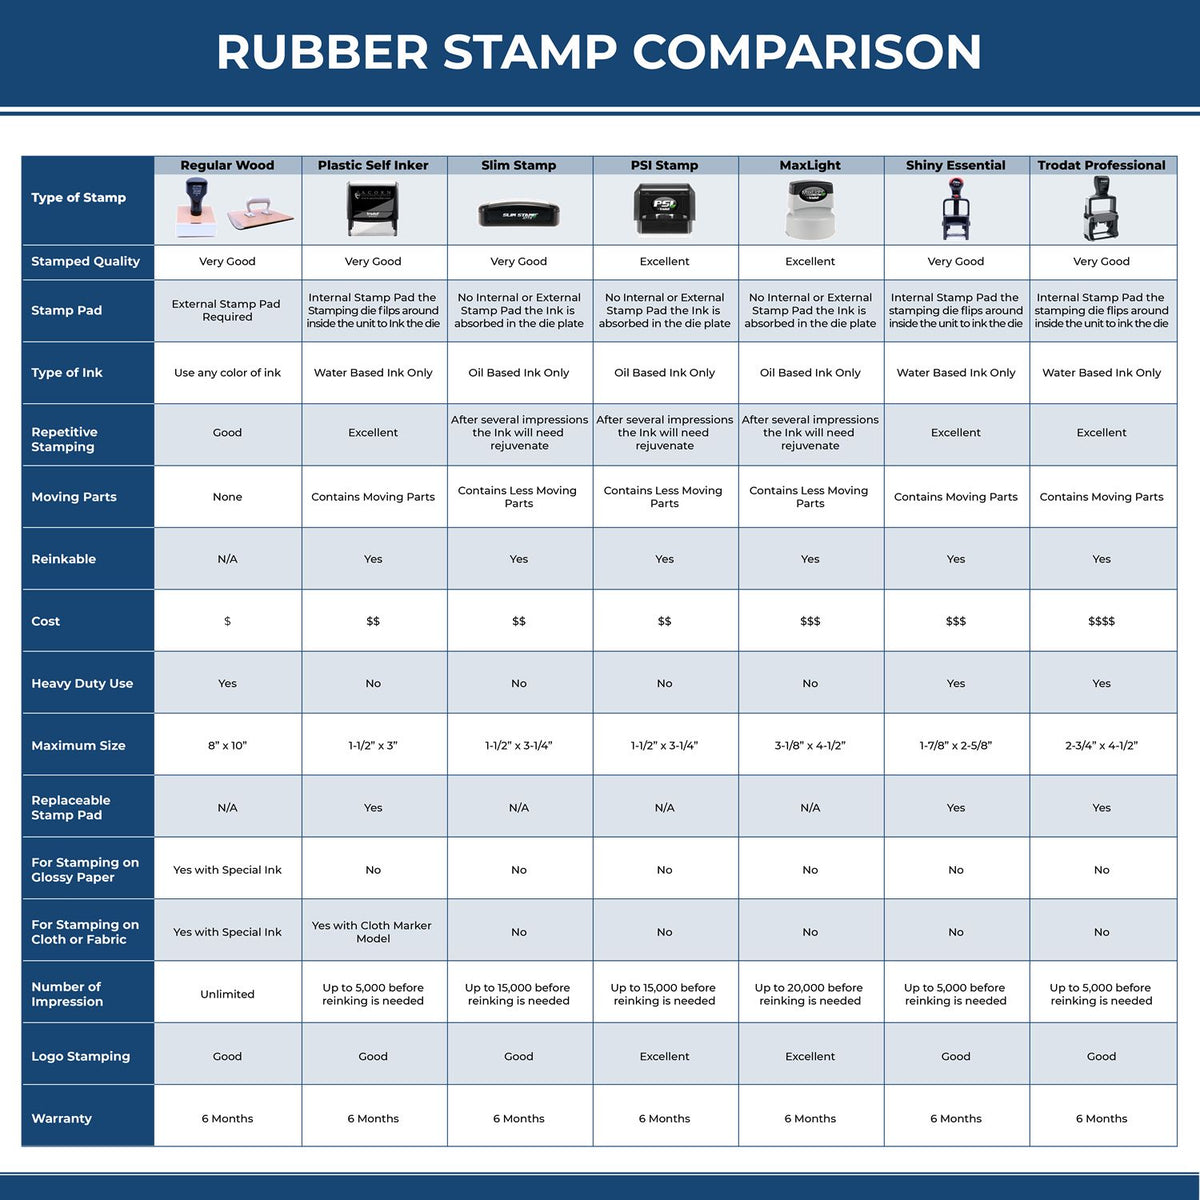 Large Insurance Verified Rubber Stamp 4985R Rubber Stamp Comparison